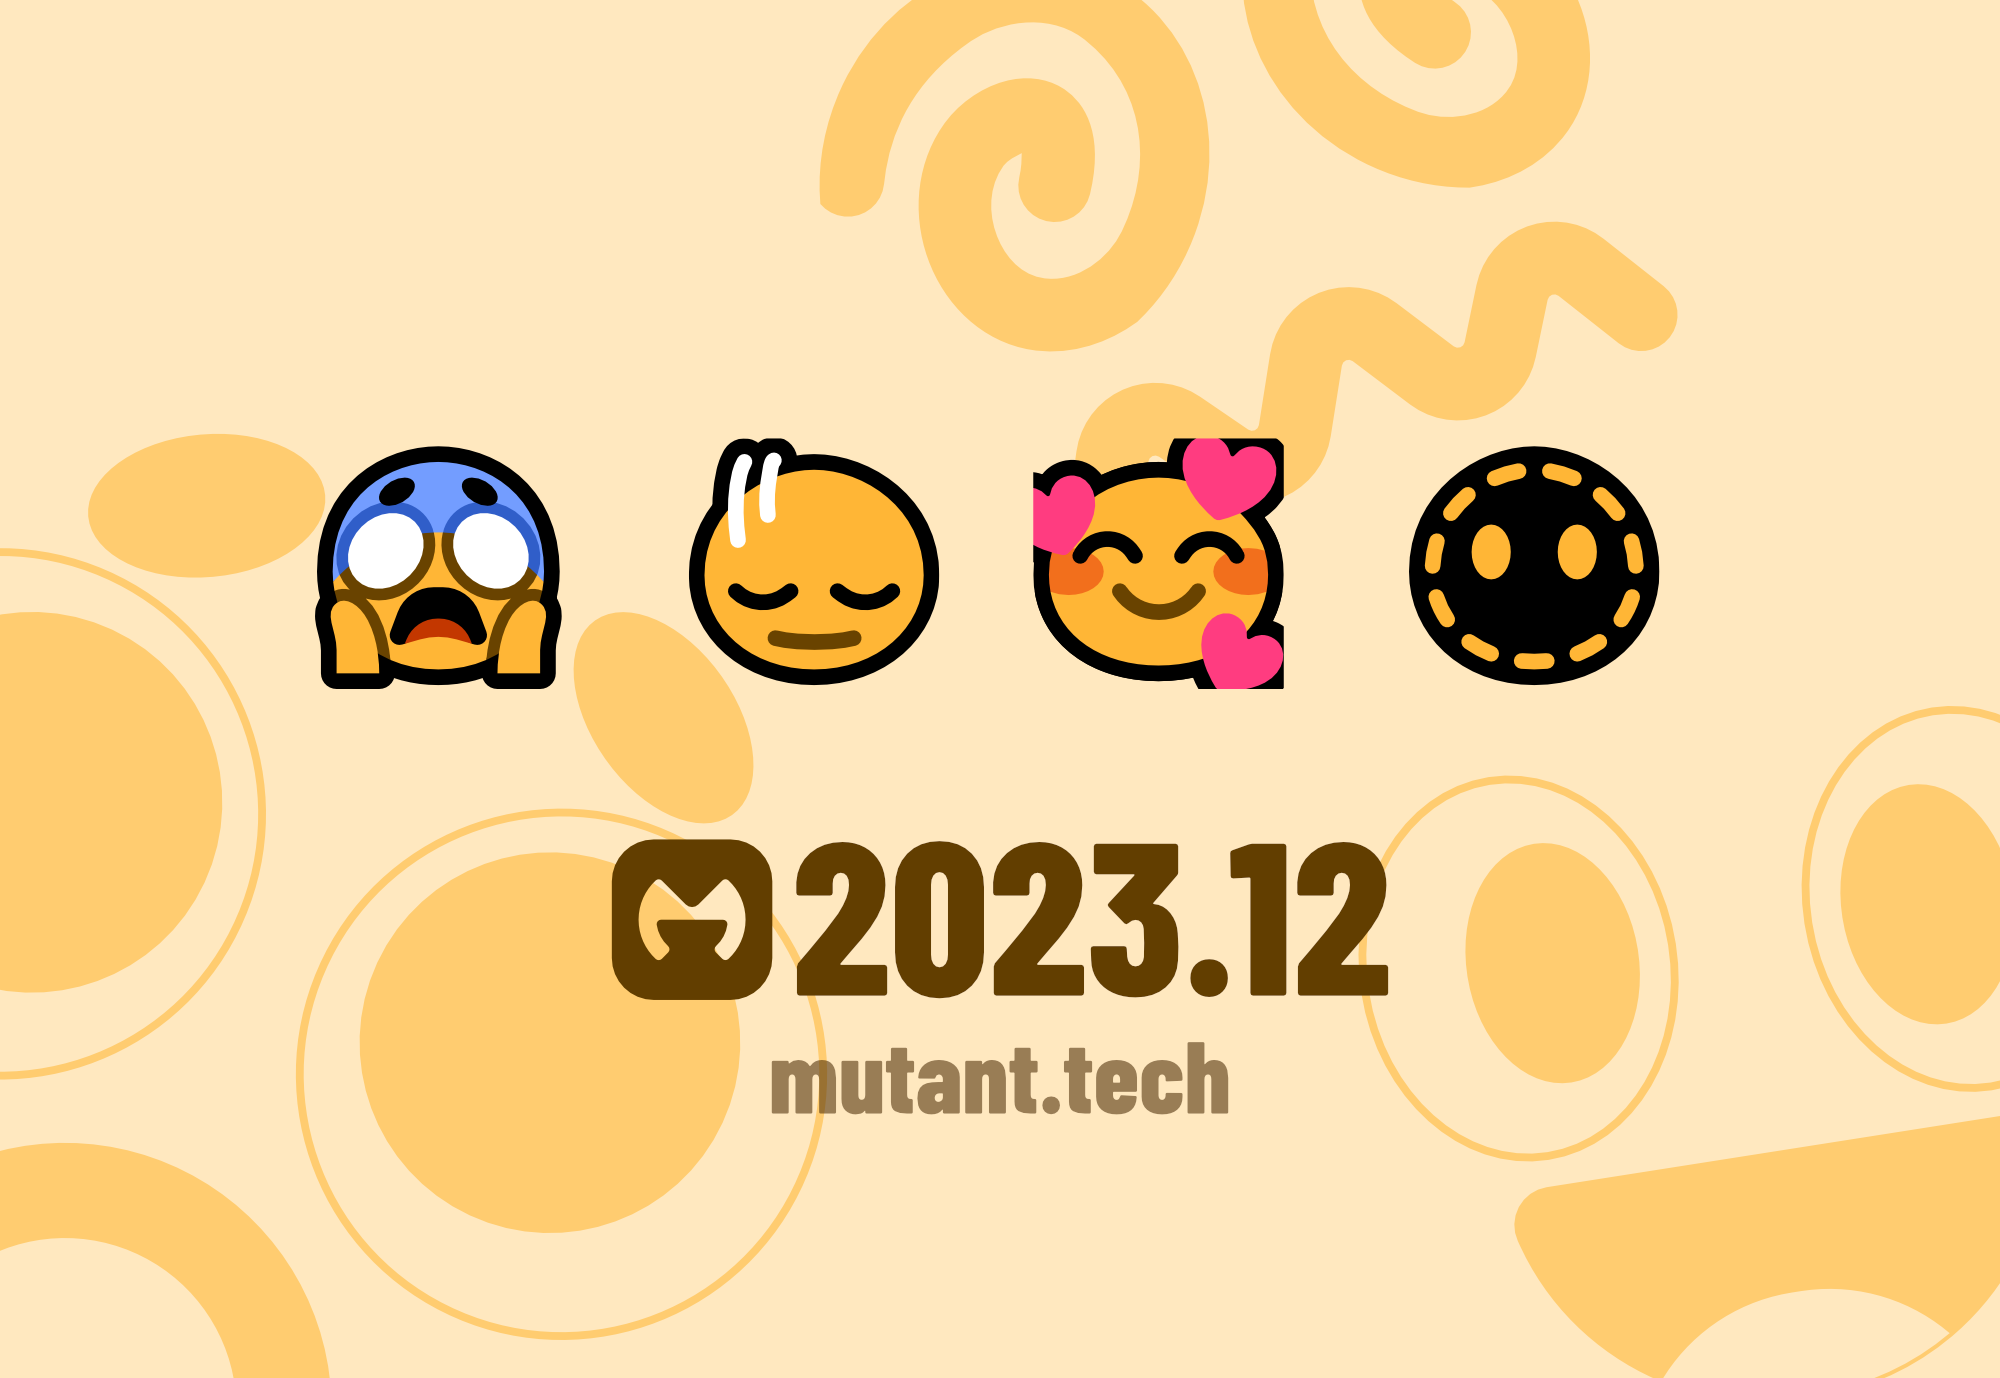 A digital image with a tan background patterned with monochrome close-up smiley faces. At the center, there's a row of stylized emoji: scream, head shaking vertically, smilingg face with hearts and outline face. Below the icons, the text "2023.12 mutant.tech" in dark brown.